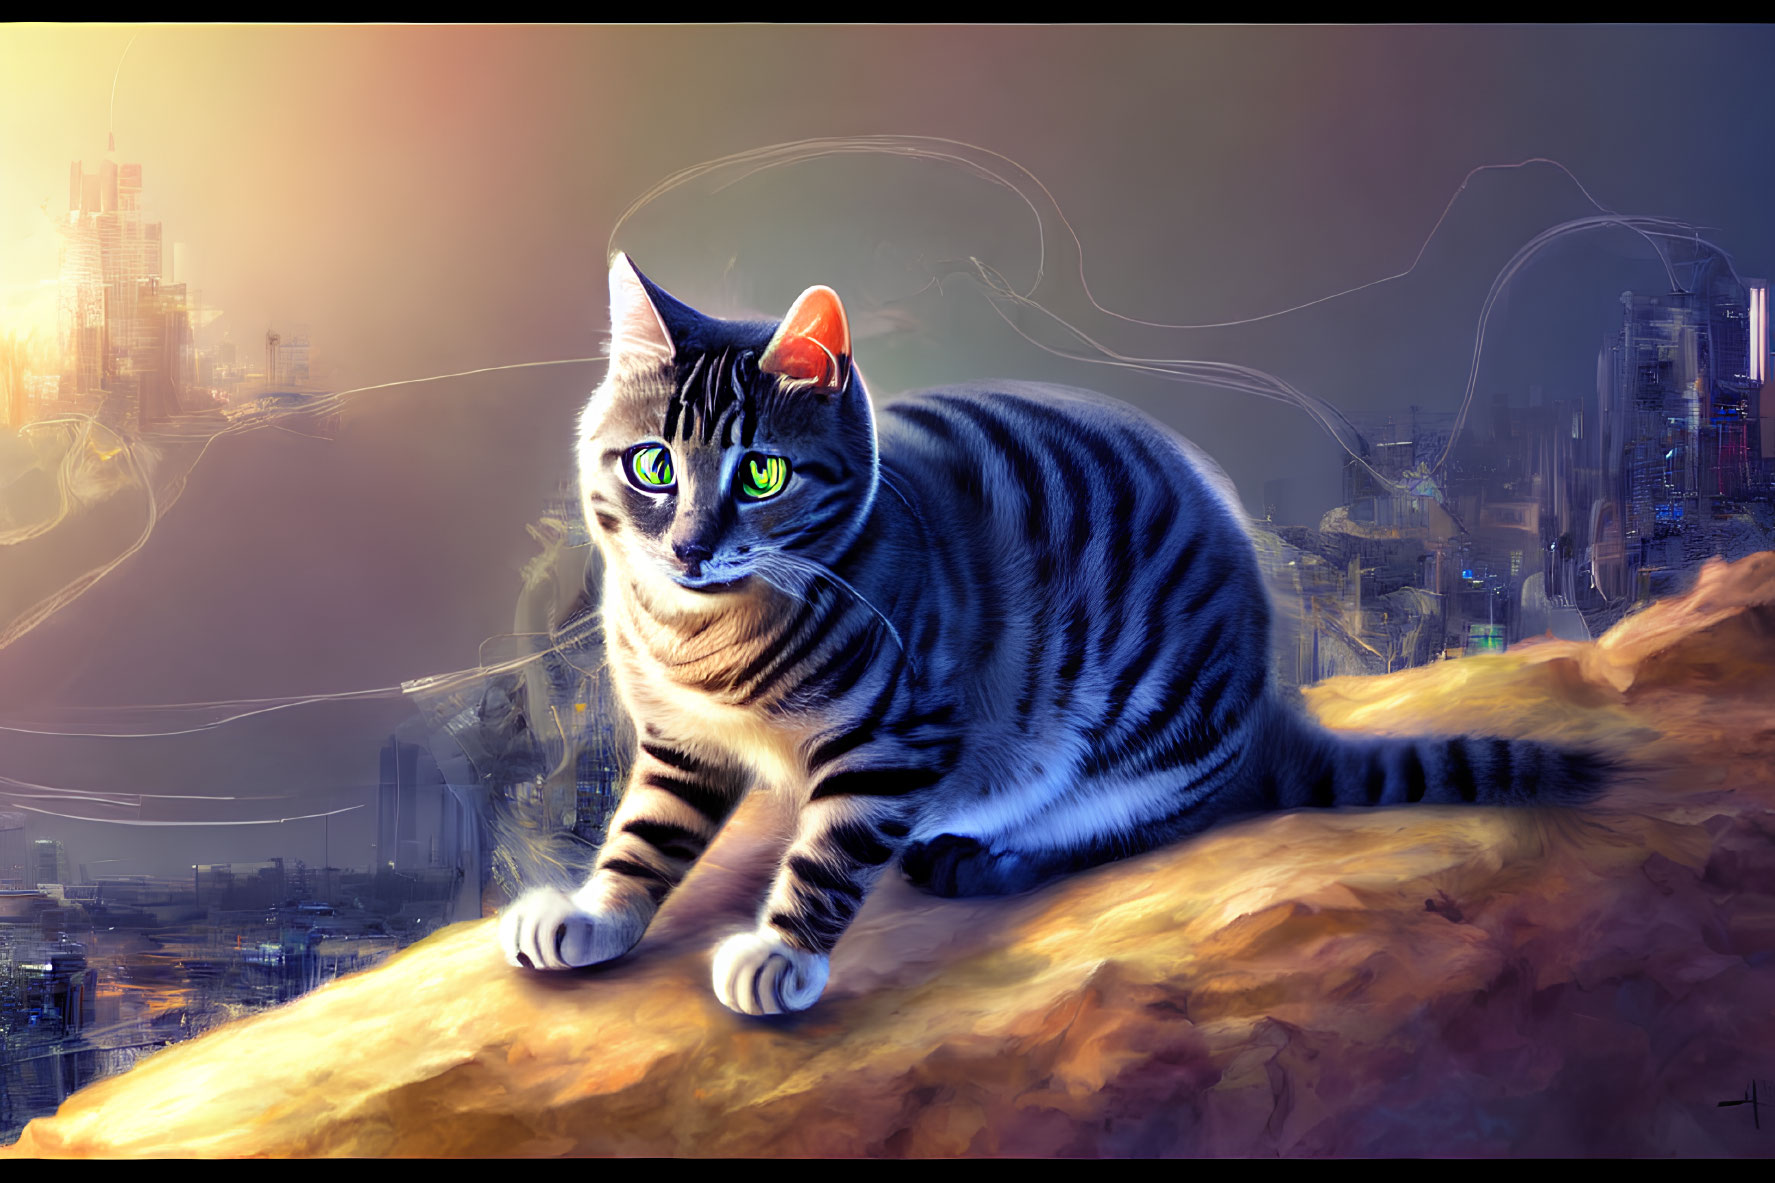 Striped cat with green eyes on rocky outcrop in futuristic cityscape glow